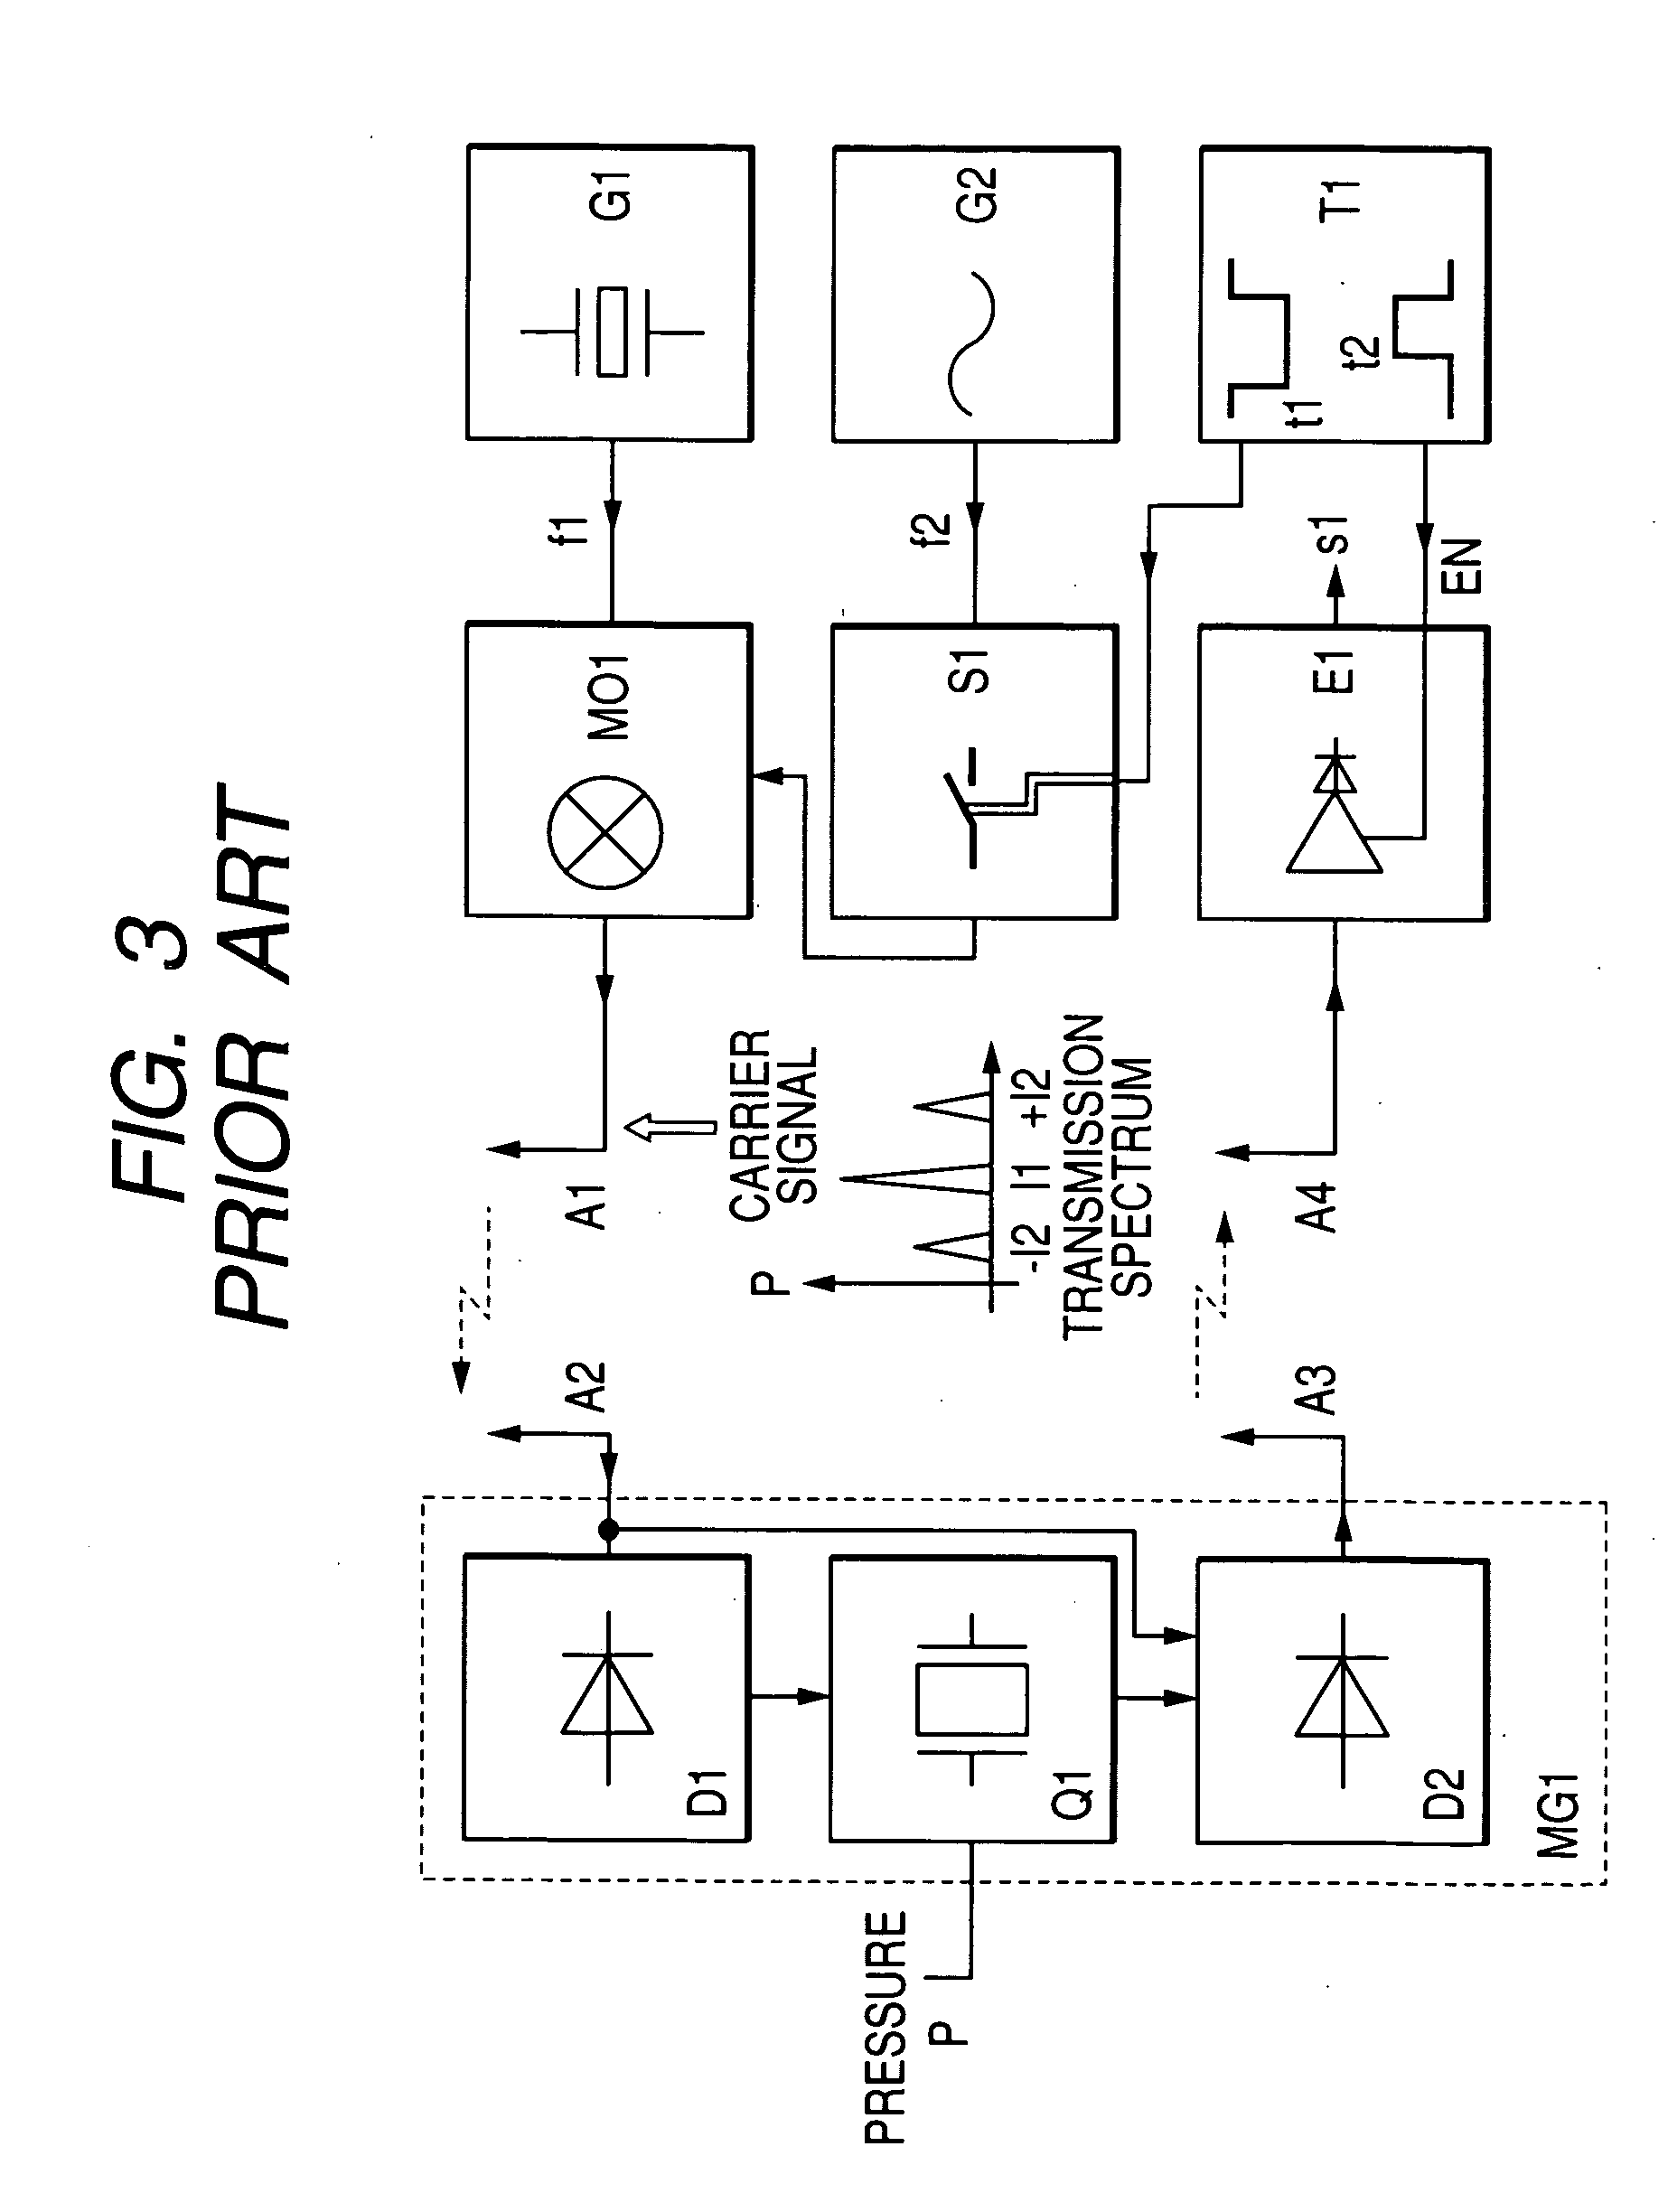 Tire information detecting apparatus without distortion